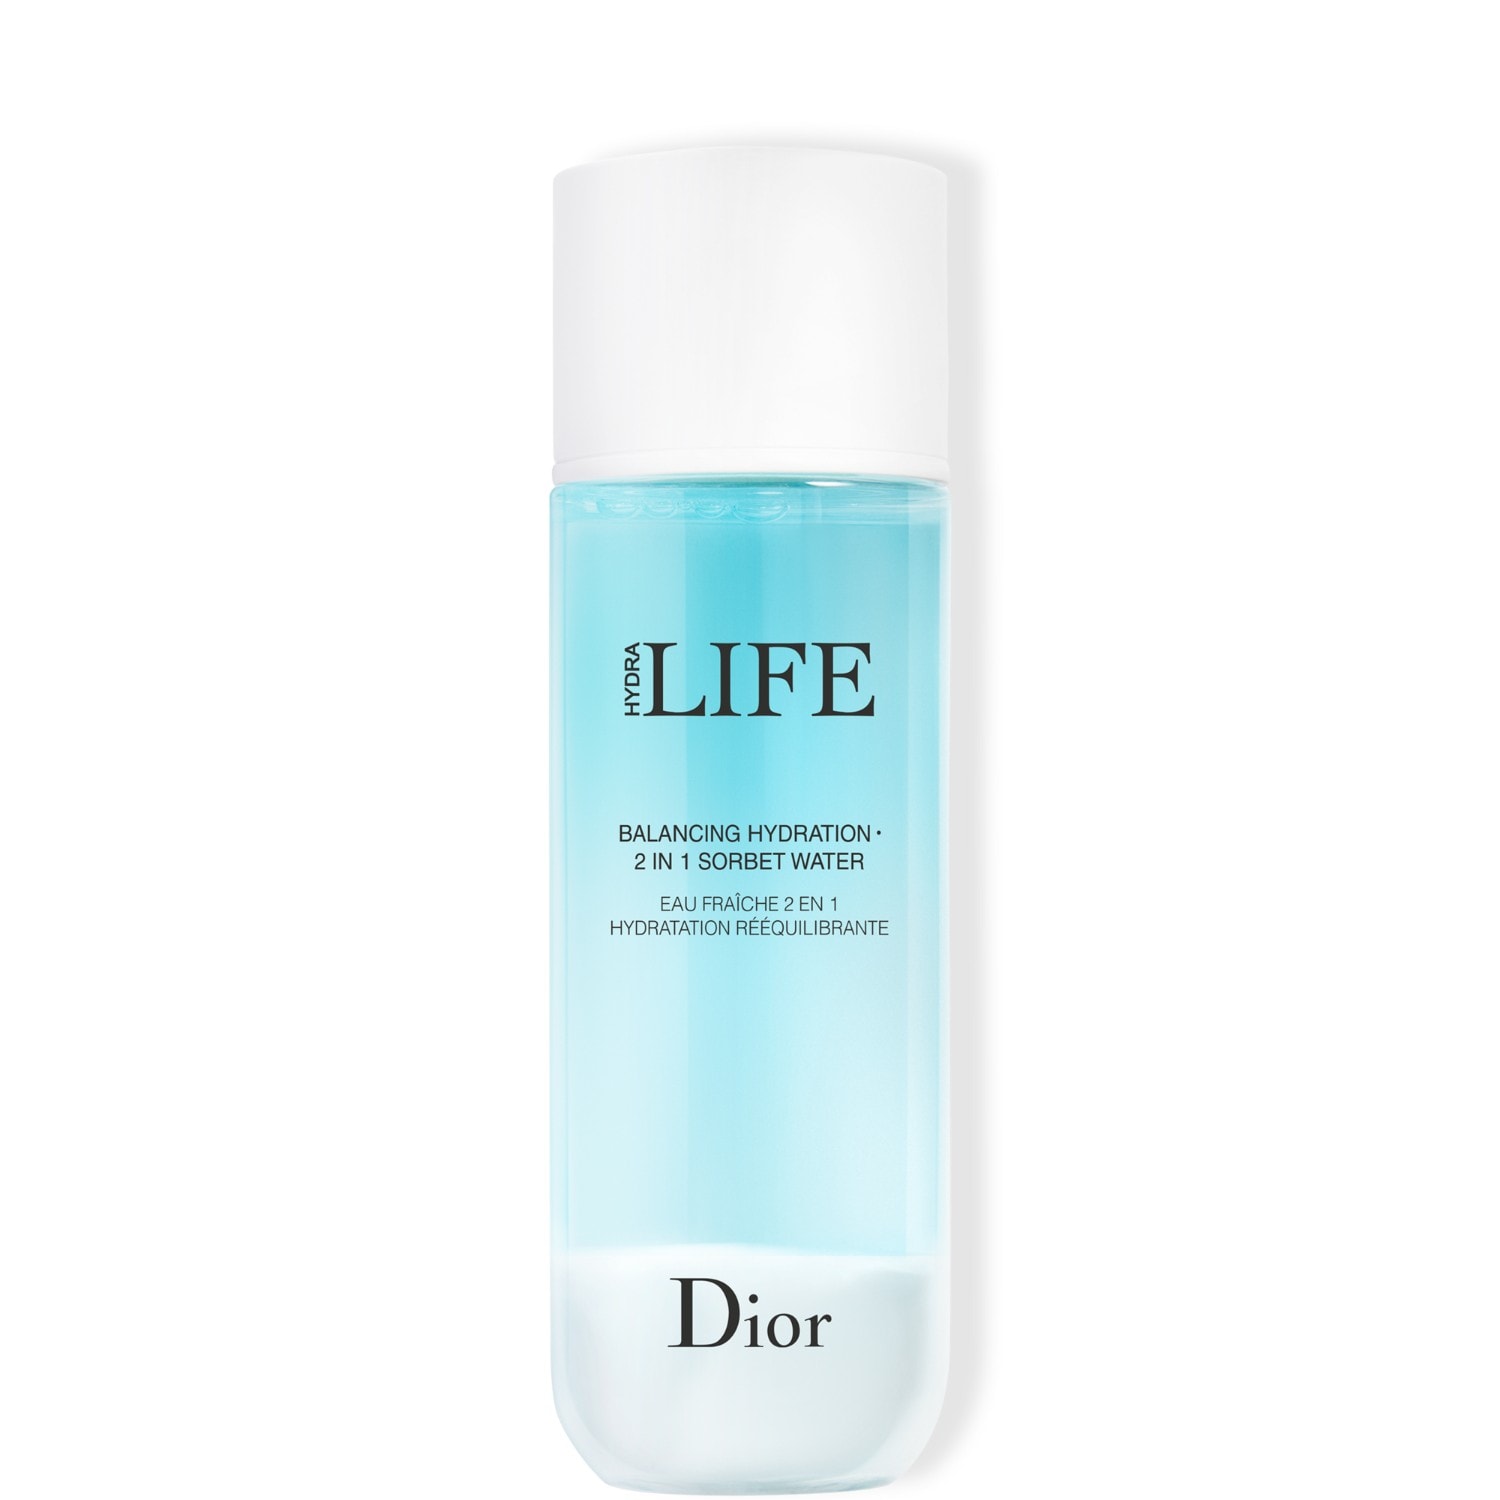 Dior Hydra Life 2 In 1 Sorbet Water